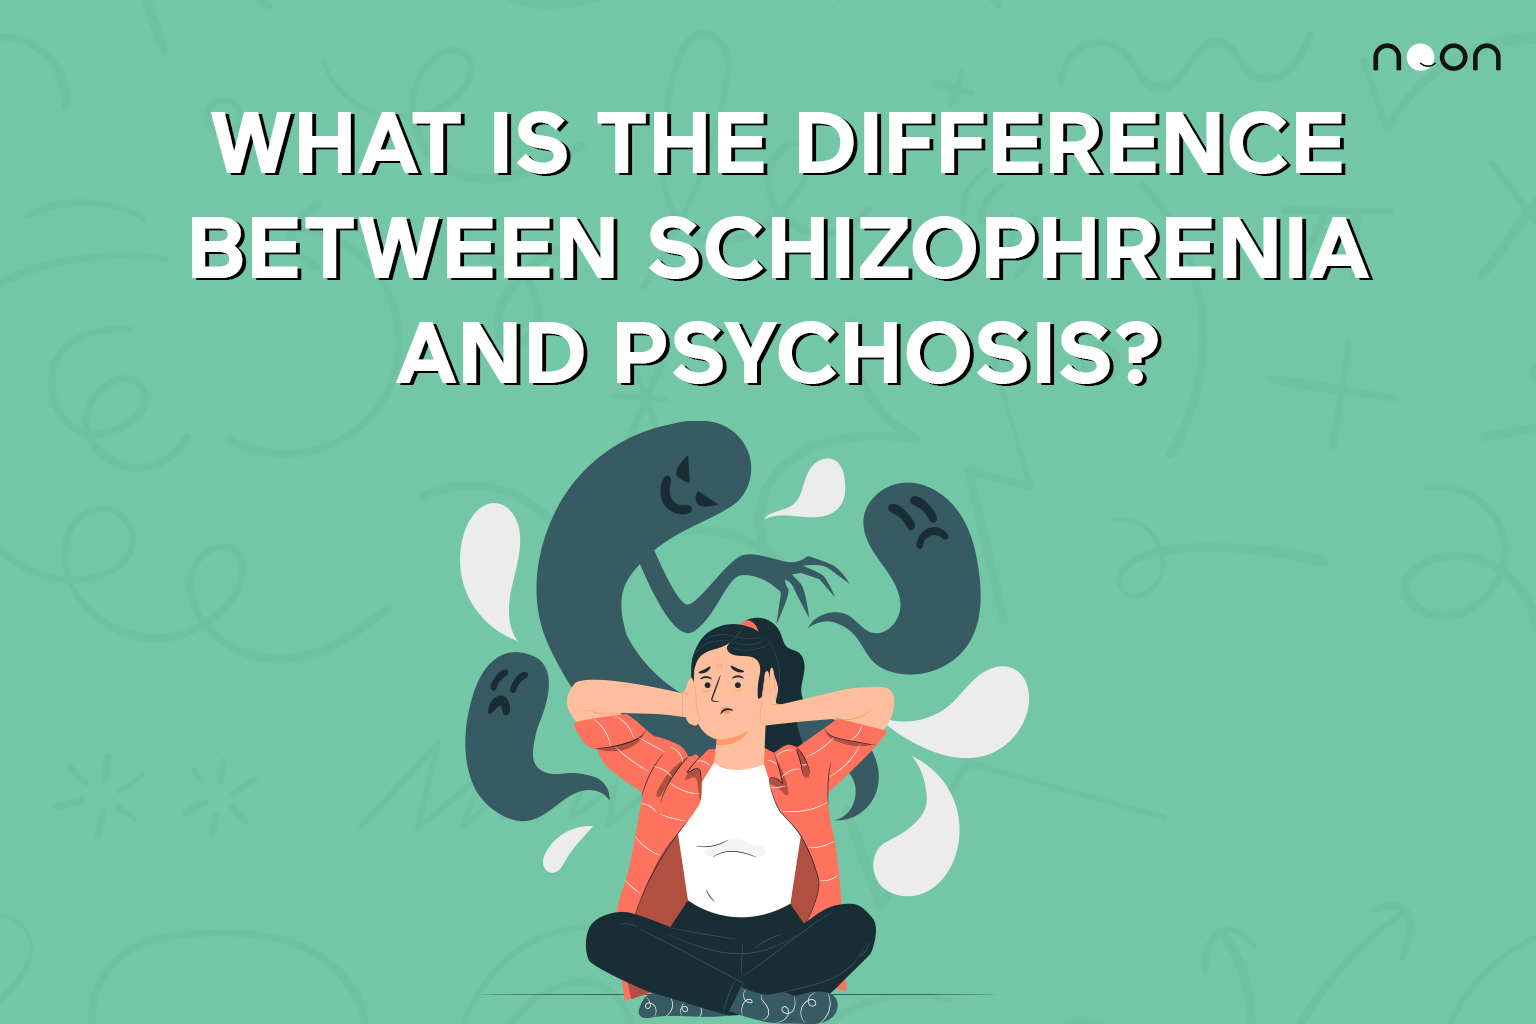 schizophrenia and psychosis differences